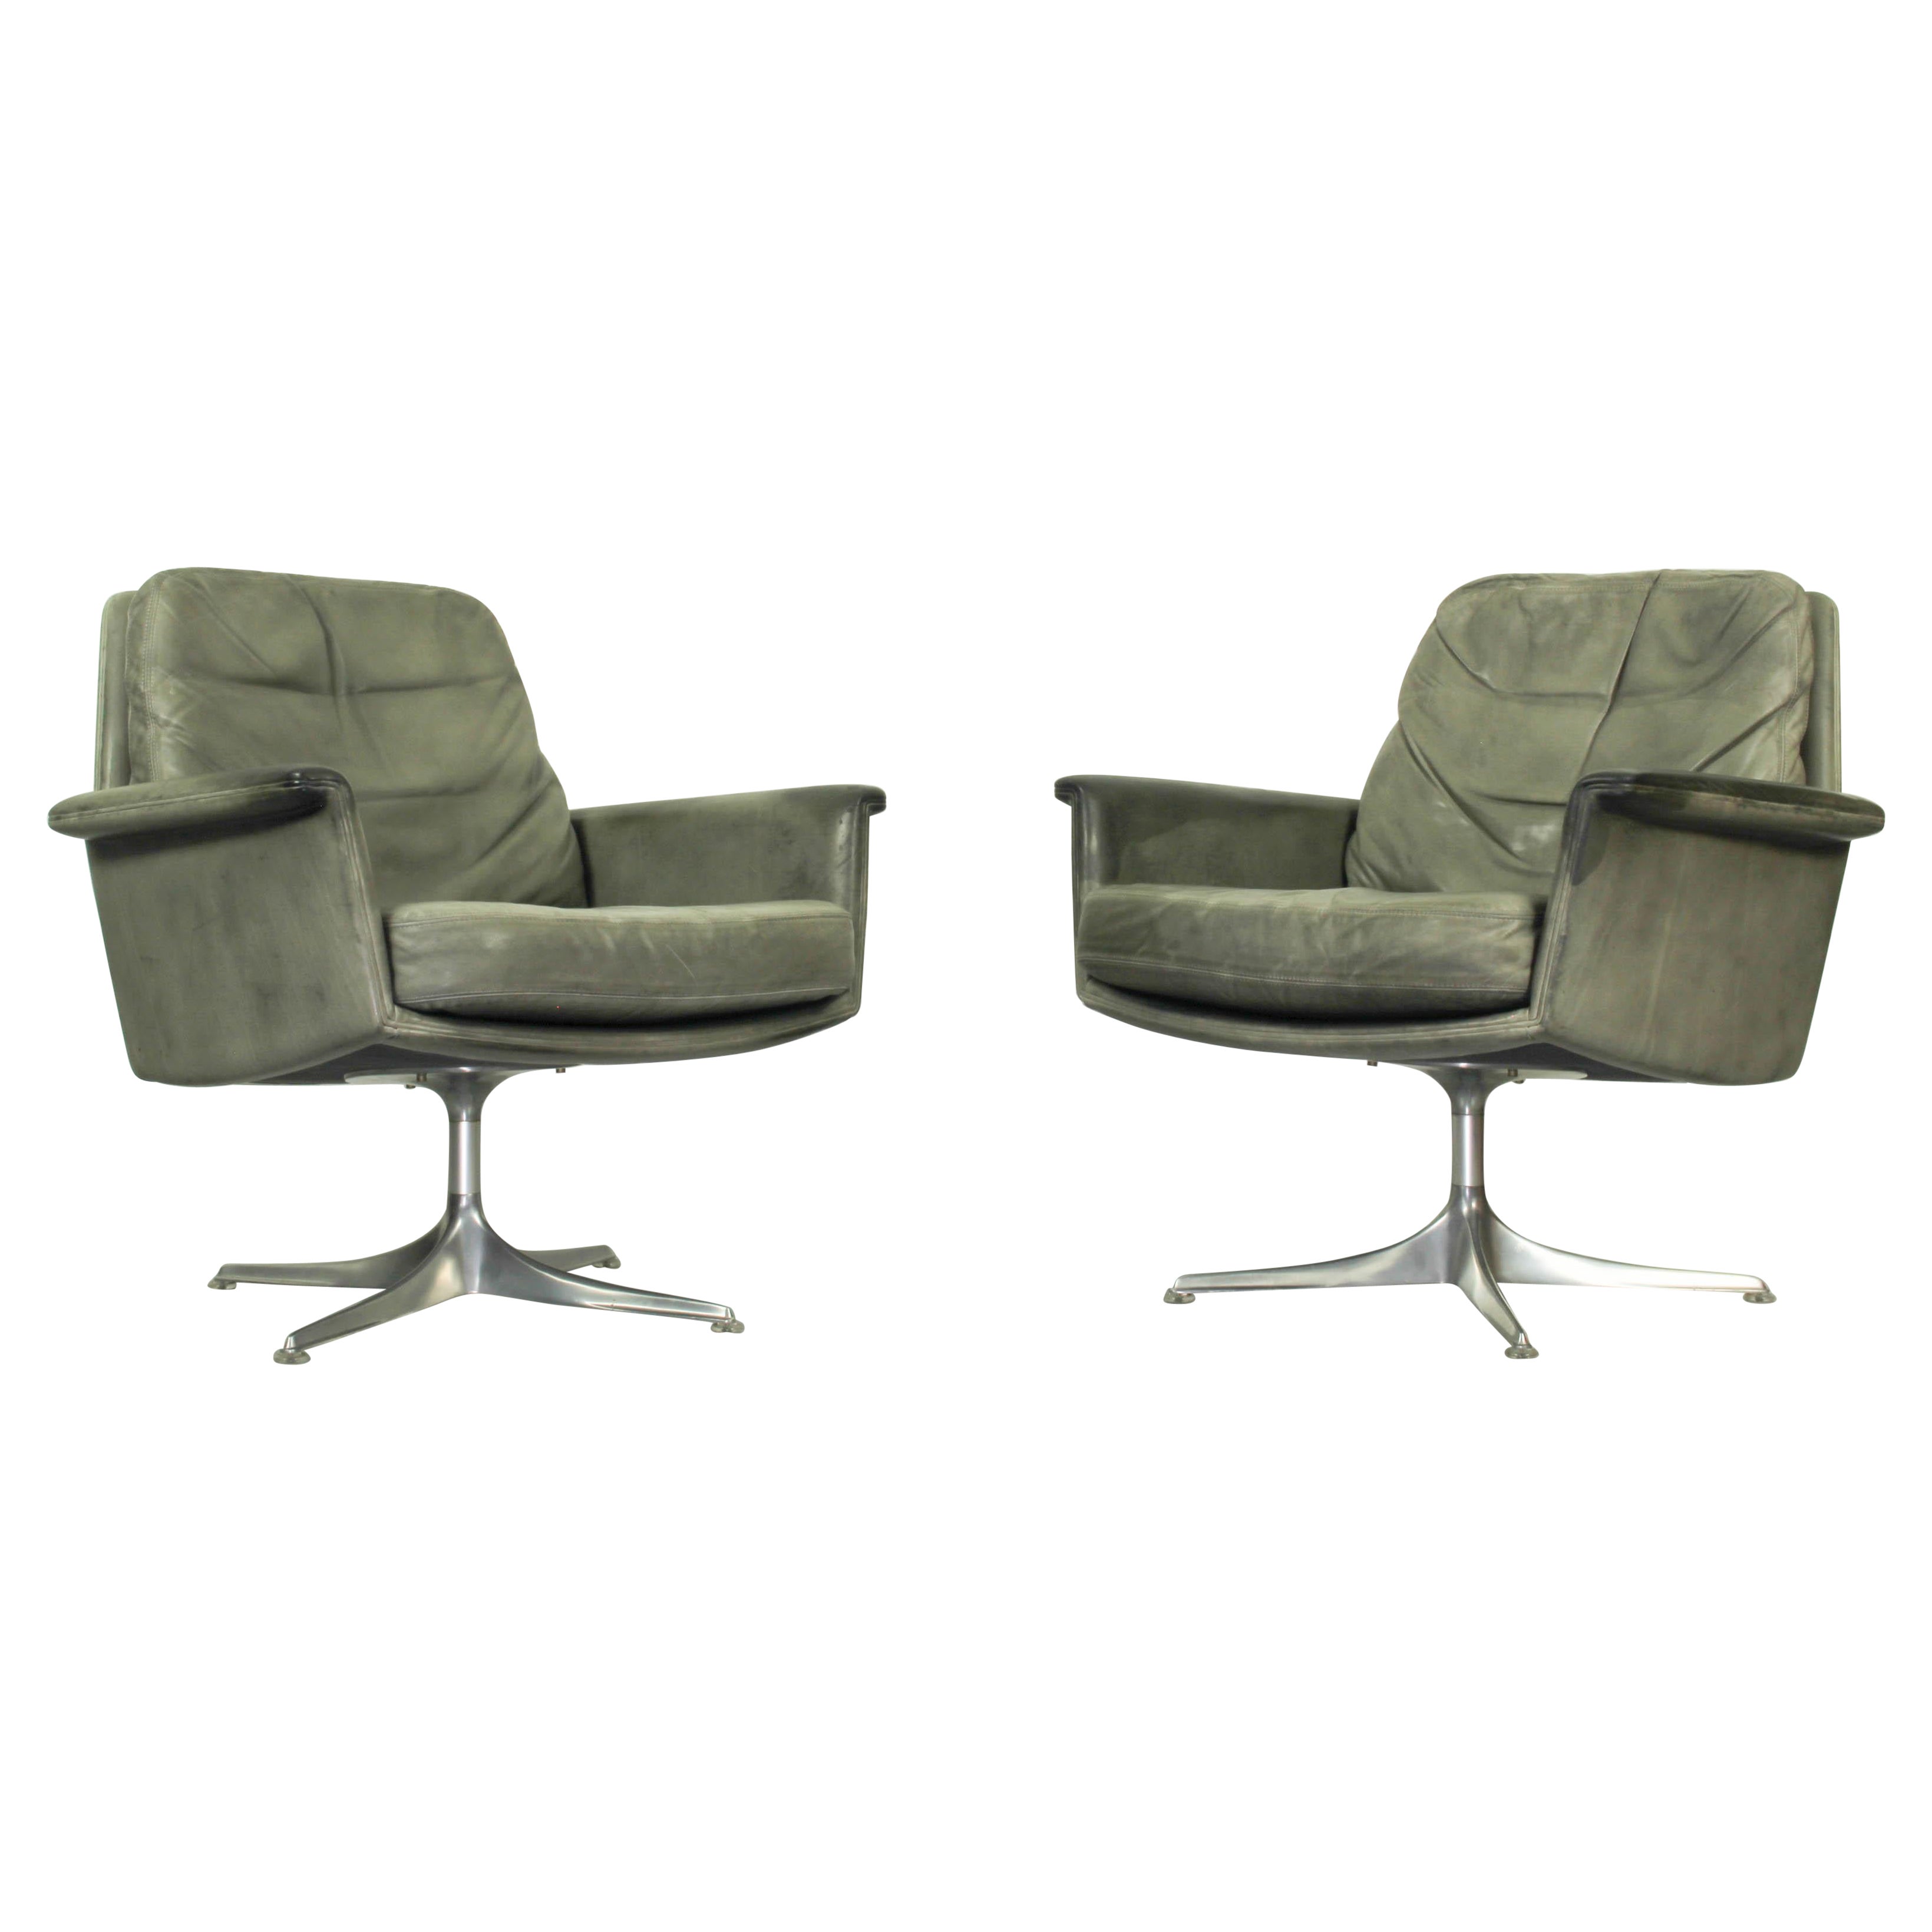 Set of 2 Sedia Swivel Chair by Horst Brüning for Cor, 1960s, Grey Leather For Sale